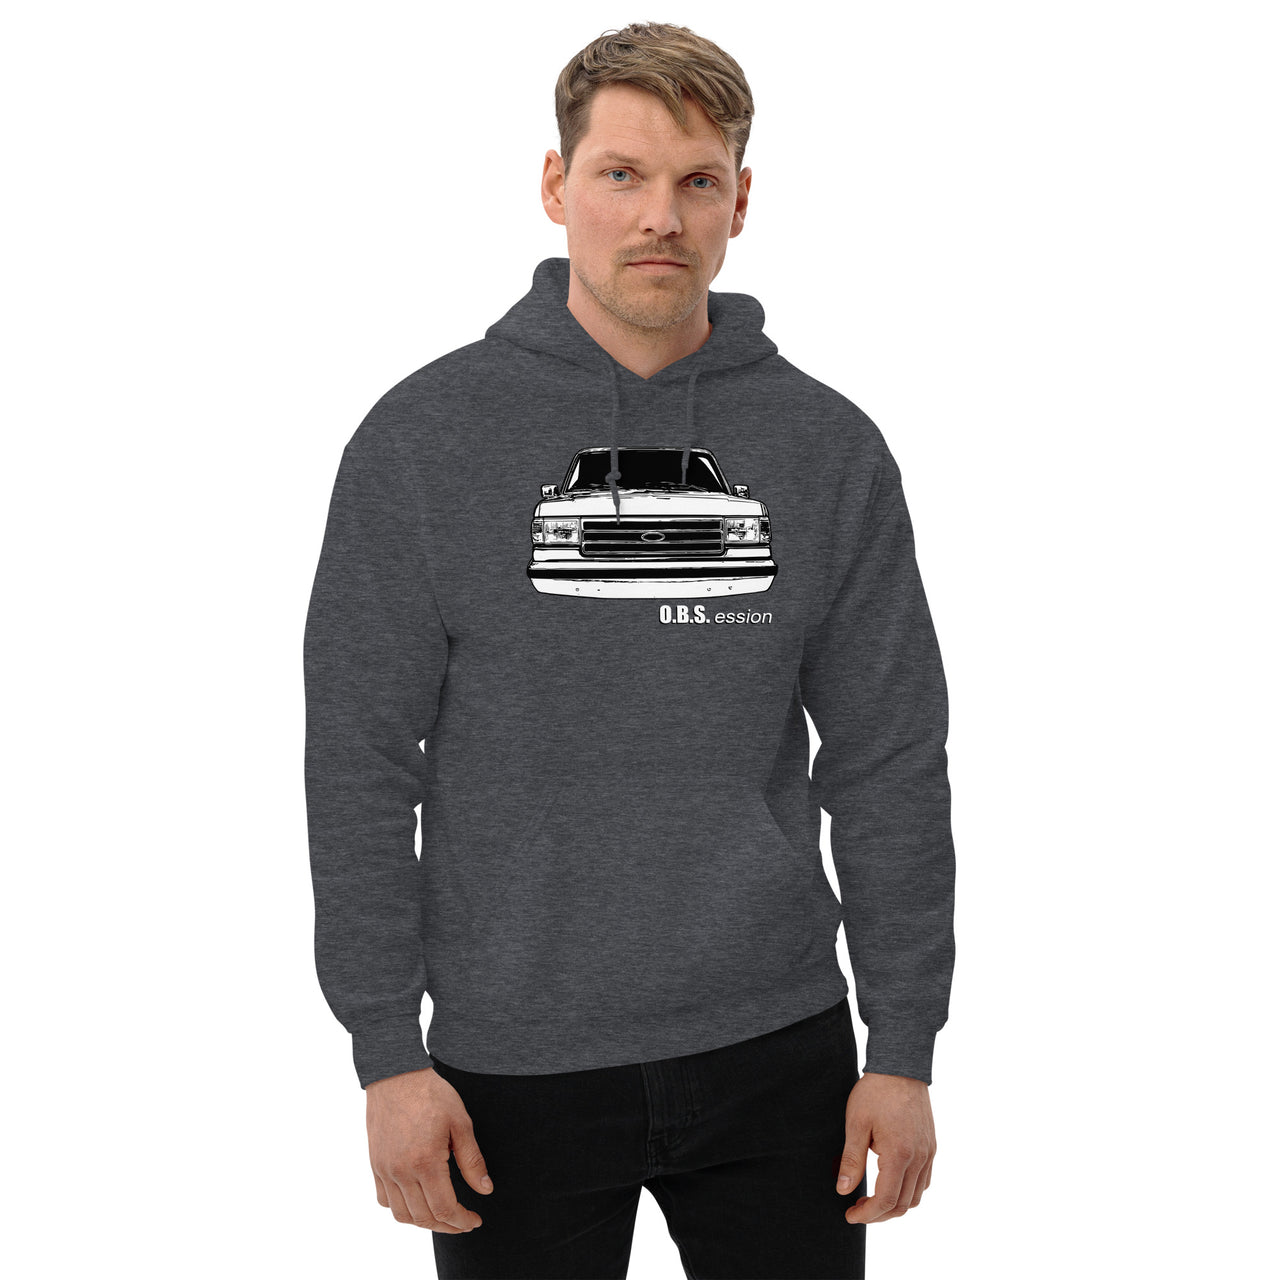 Brick Nose OBS Truck Hoodie modeled in grey